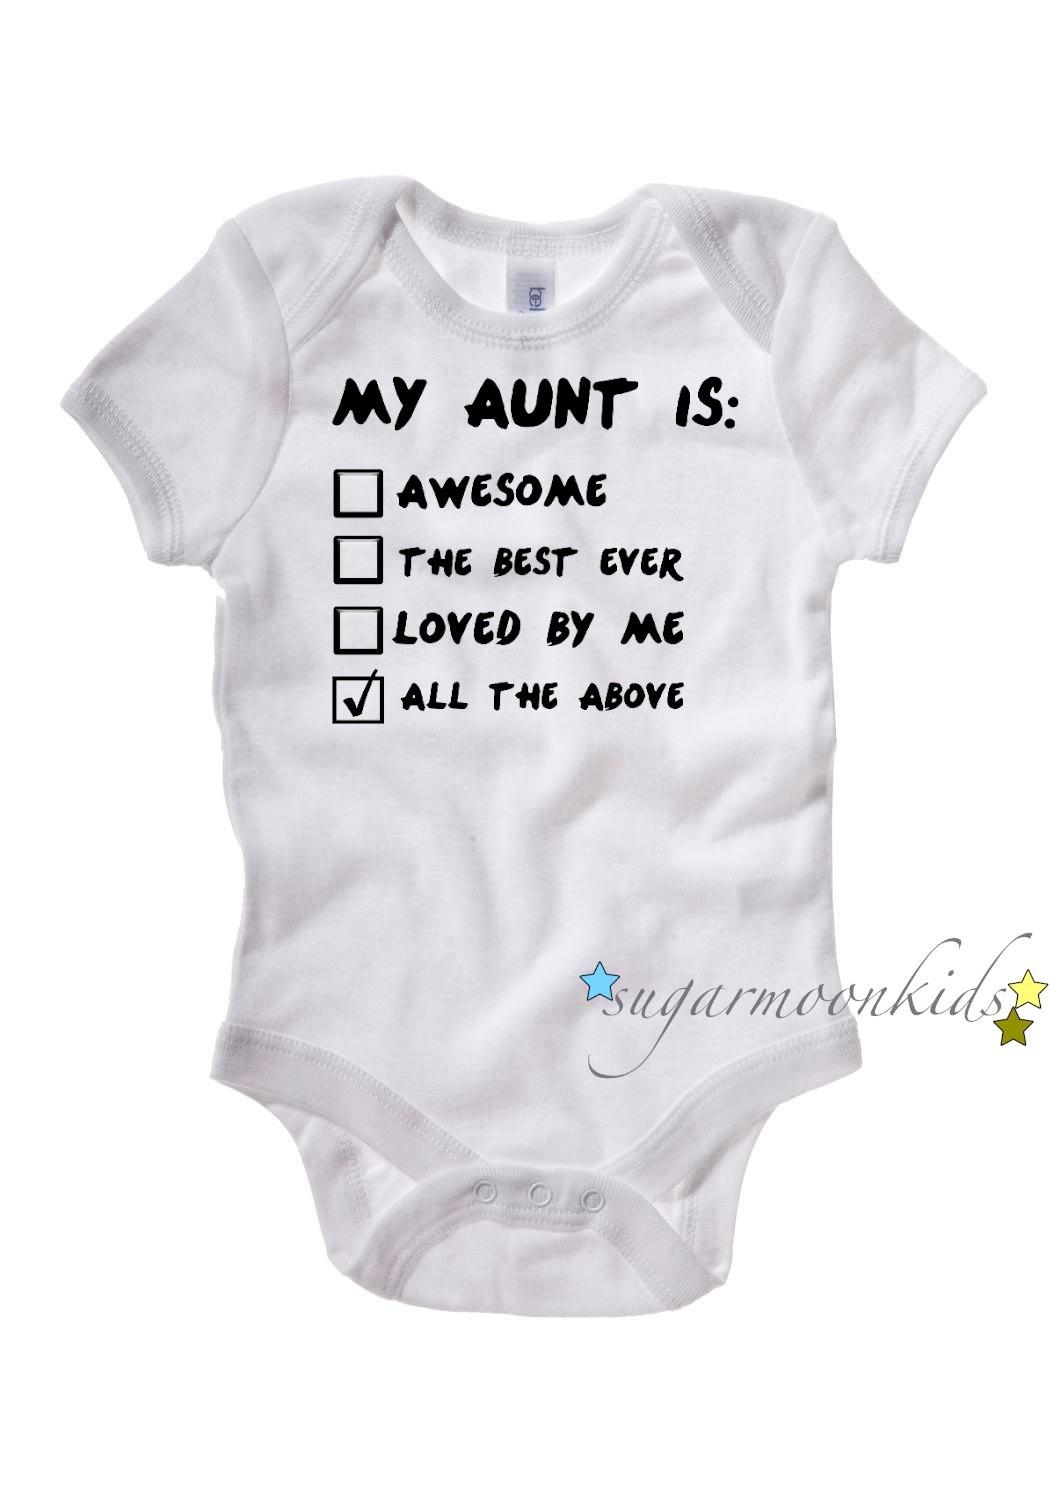 Aunties Baby Quotes
 Aunt Baby esie 6 12 months by sugarmoonkids on Etsy